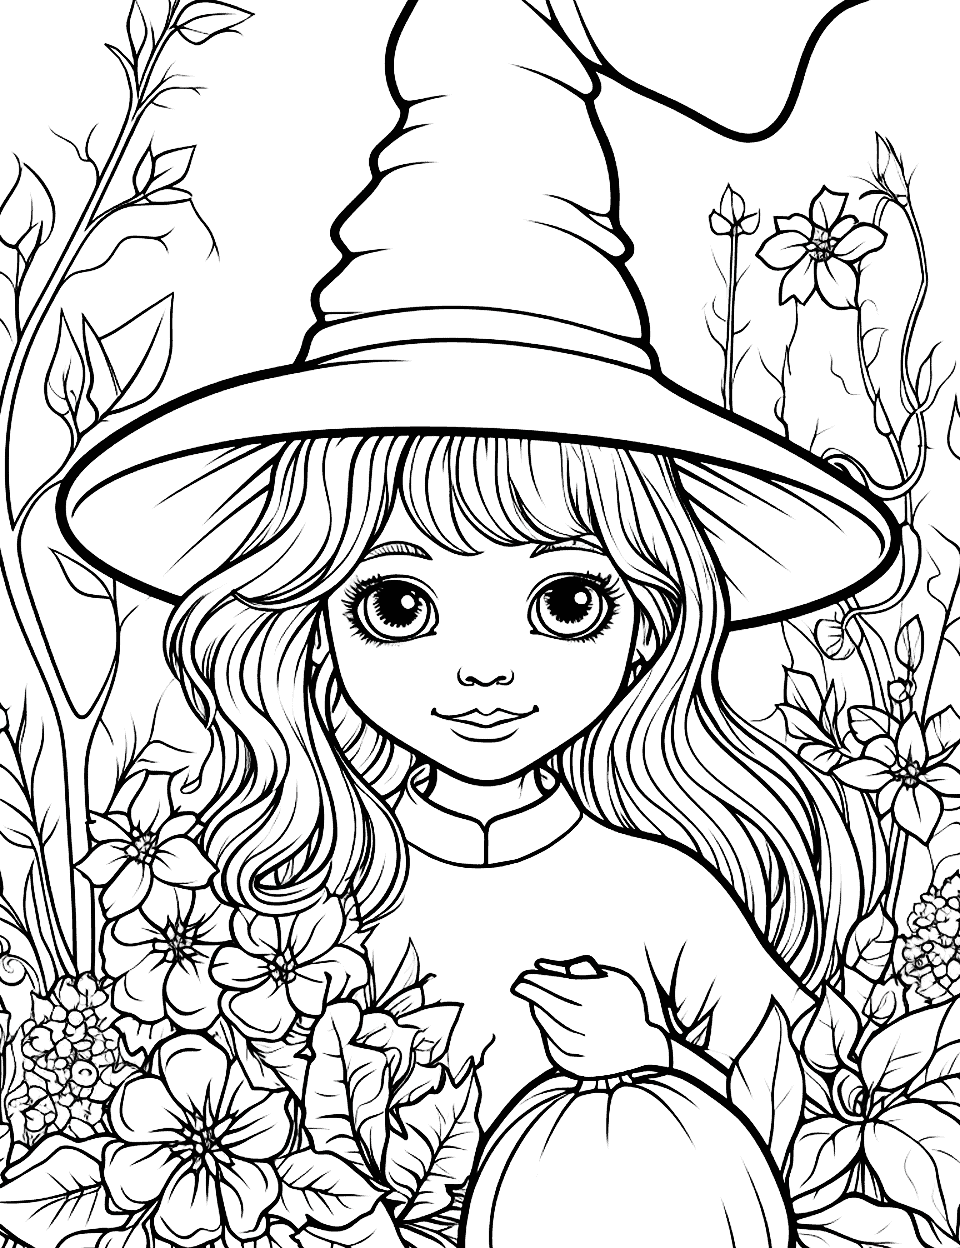 Witch's Magical Garden Witch Coloring Page - A witch in a magical garden with plants that have unusual flowers.